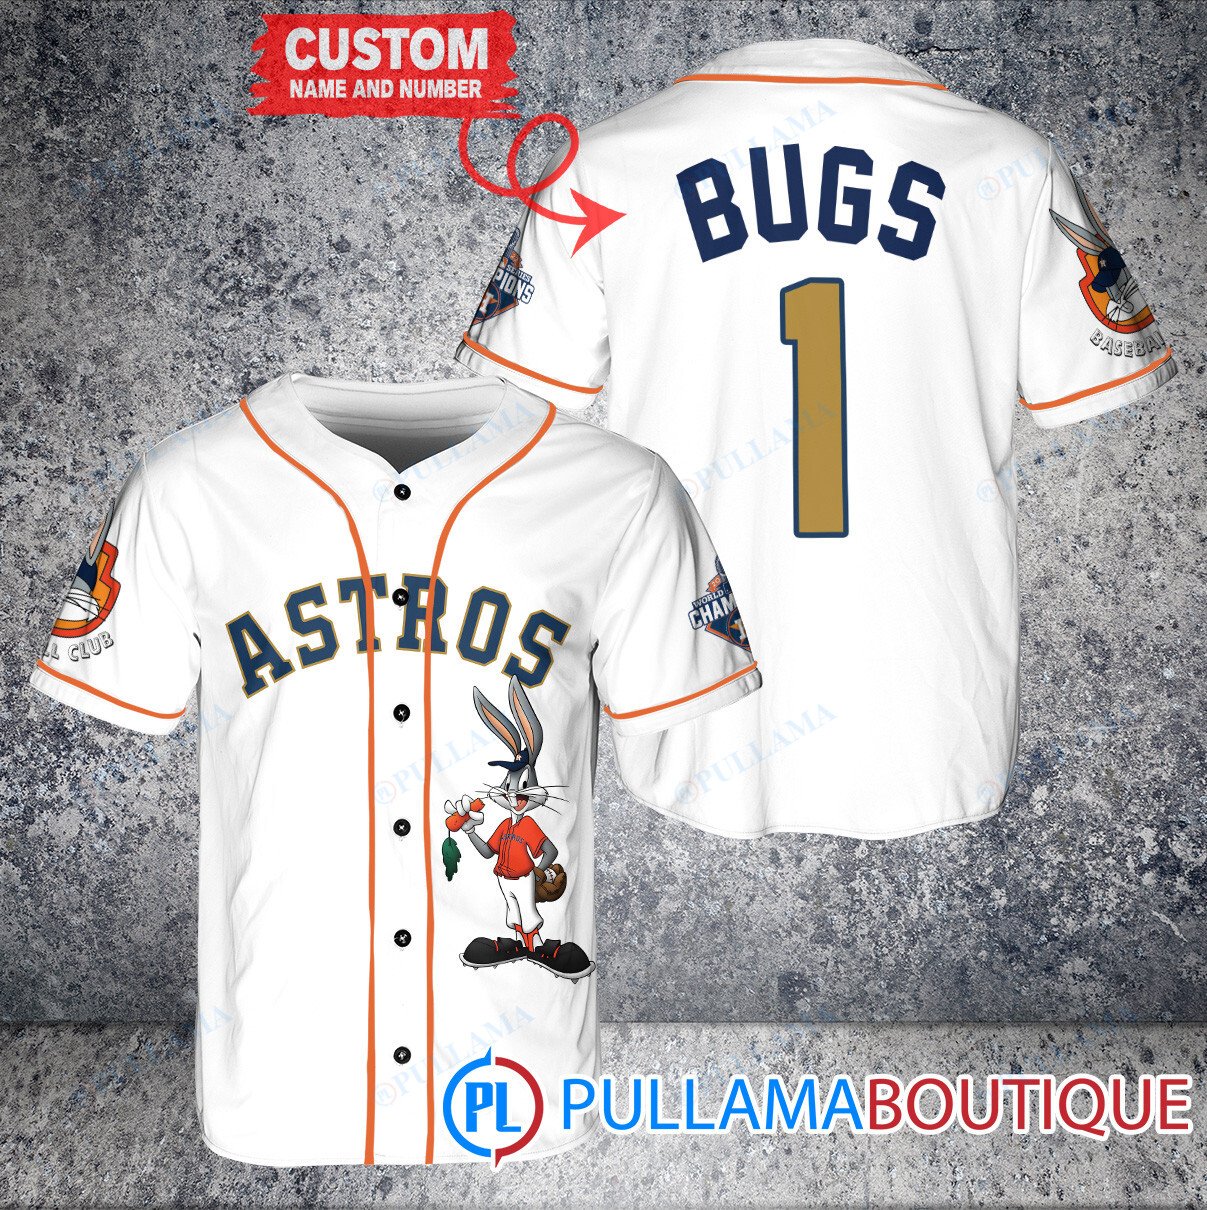 Houston Astros Premium MLB Jersey Shirt Custom Number And Name For